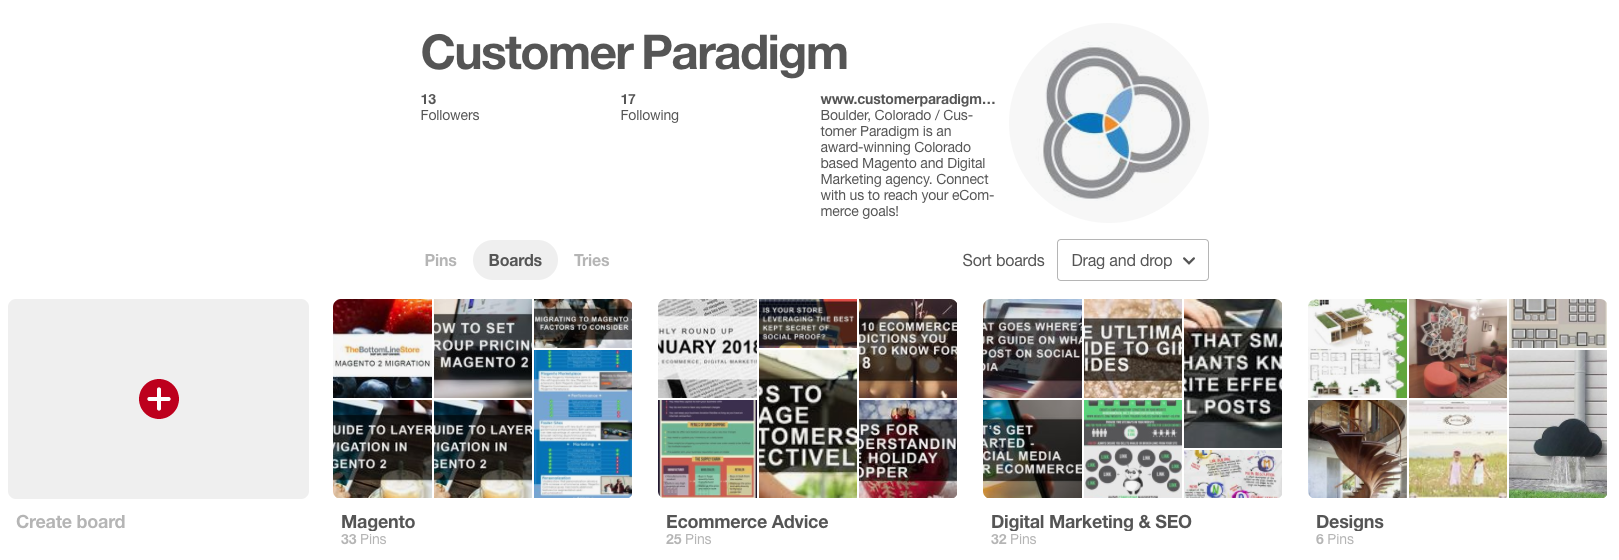 image - the header of the Customer Paradigm Pinterest business account